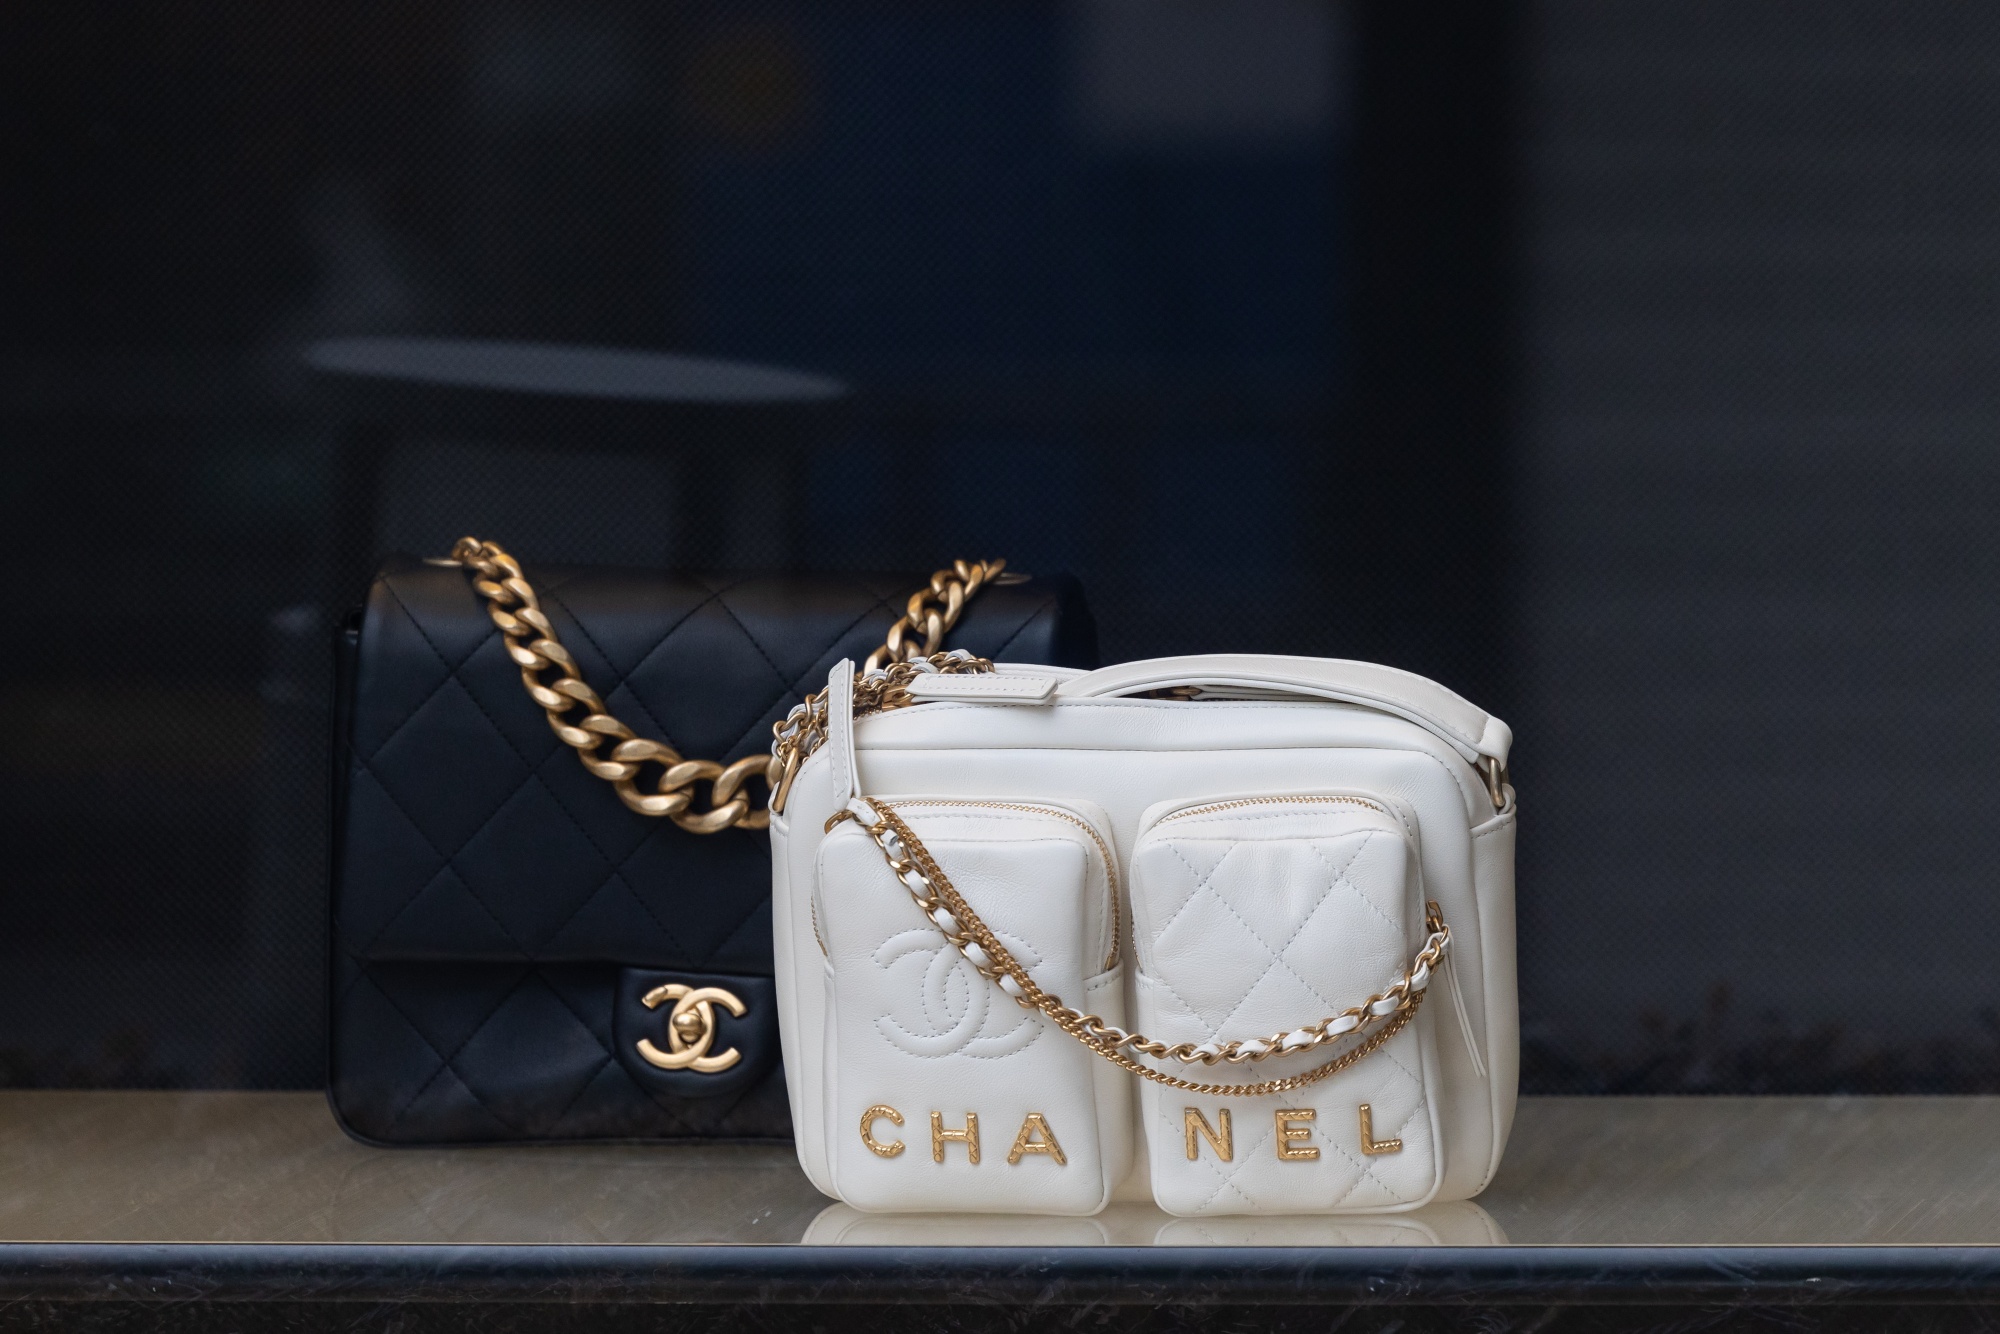 Chanel, Hermès Bags, Rolexes Make for Good Investments, Per Report